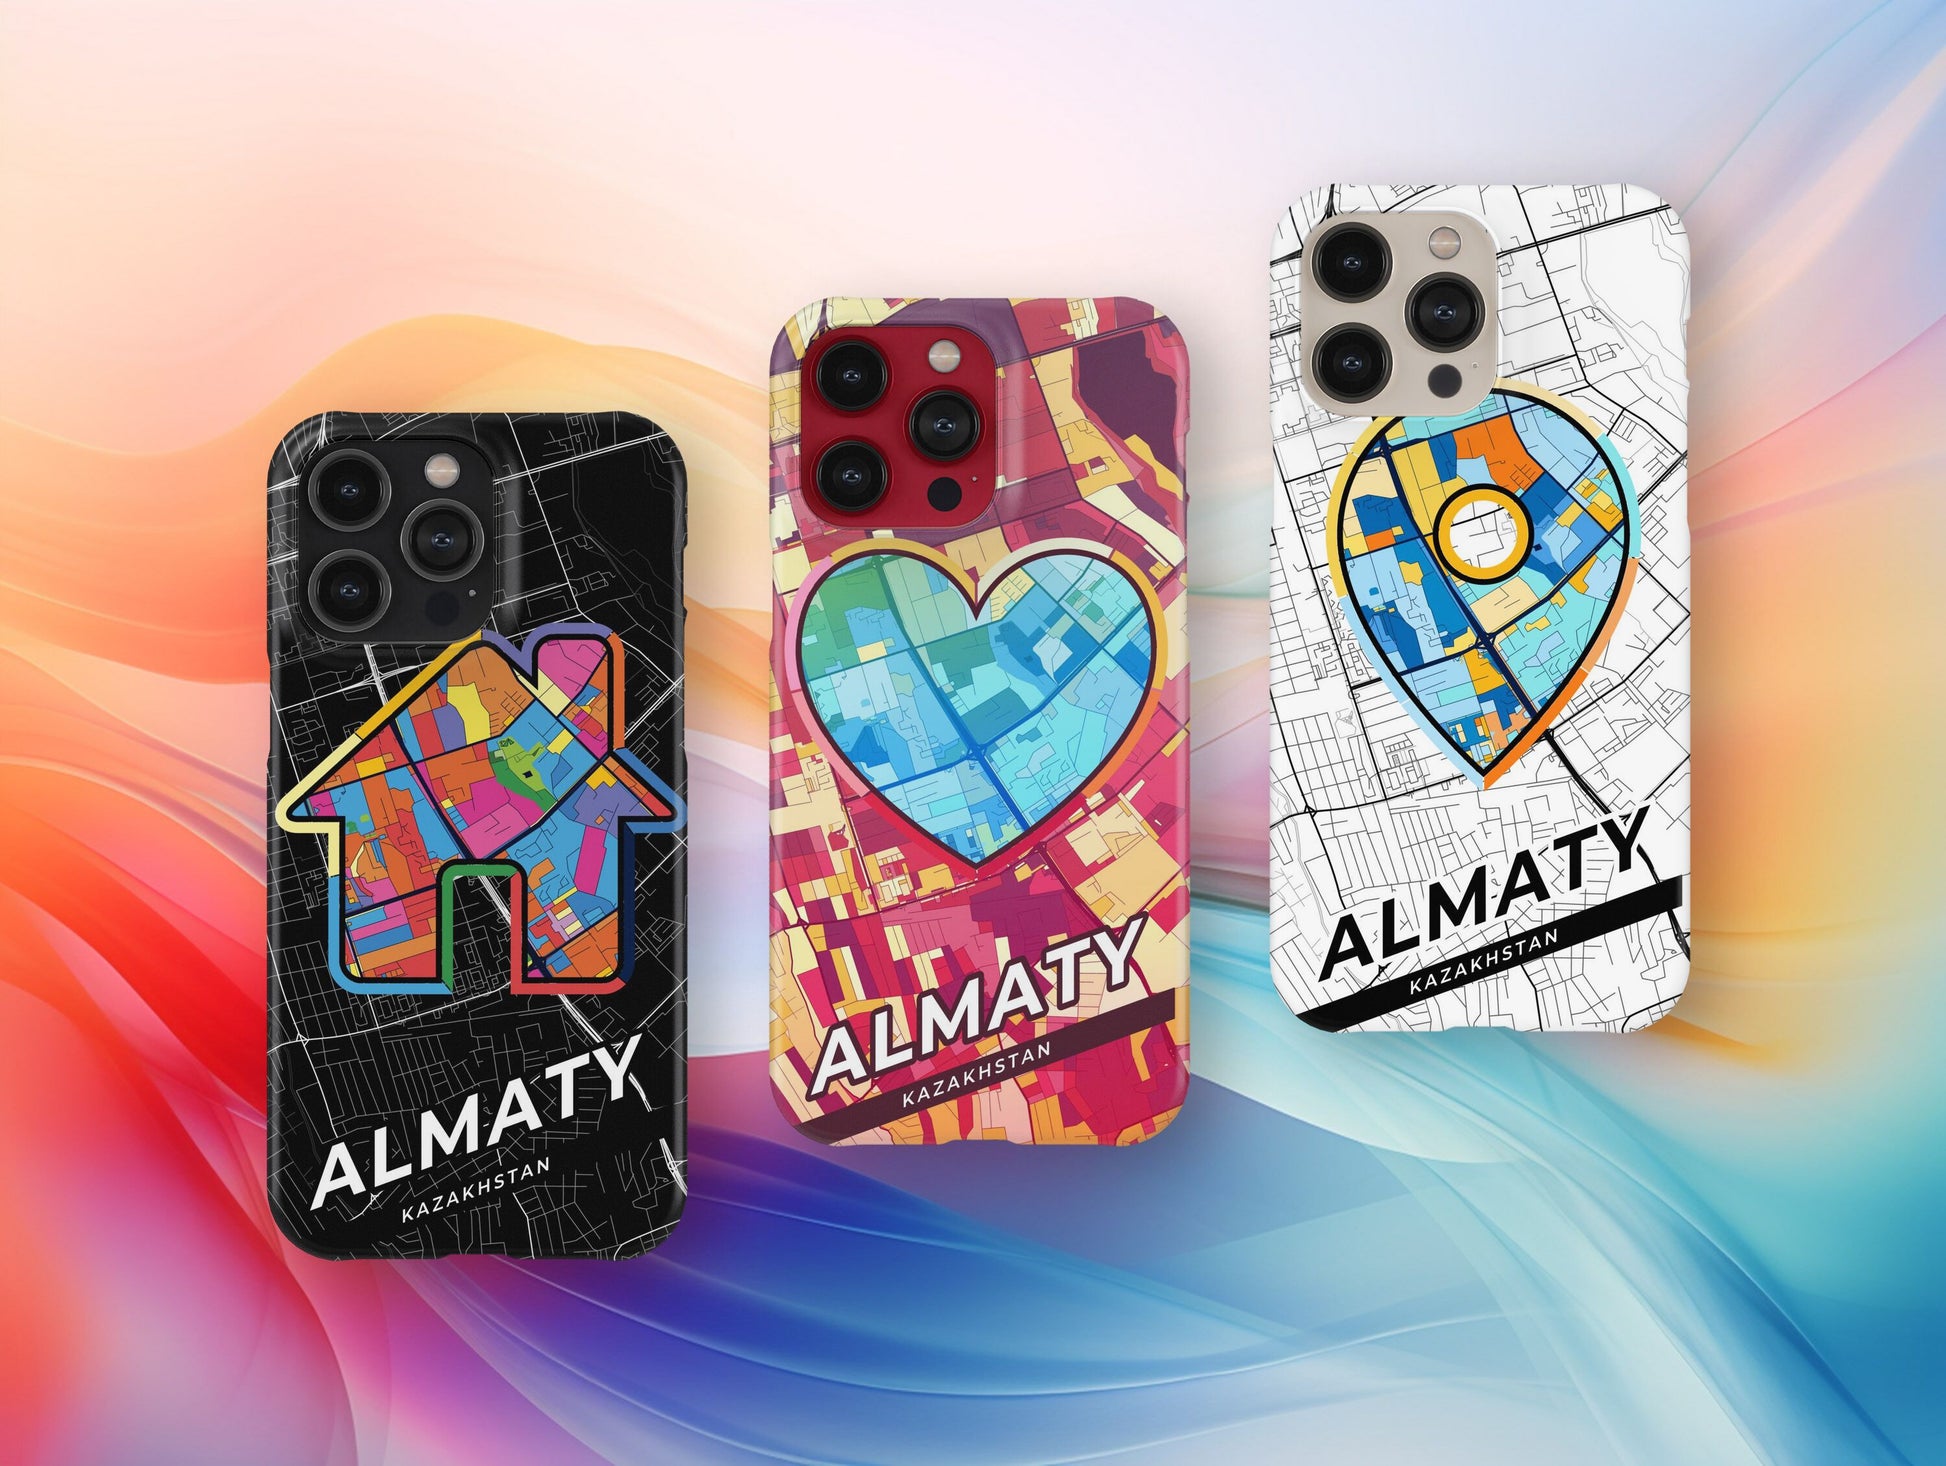 Almaty Kazakhstan slim phone case with colorful icon. Birthday, wedding or housewarming gift. Couple match cases.